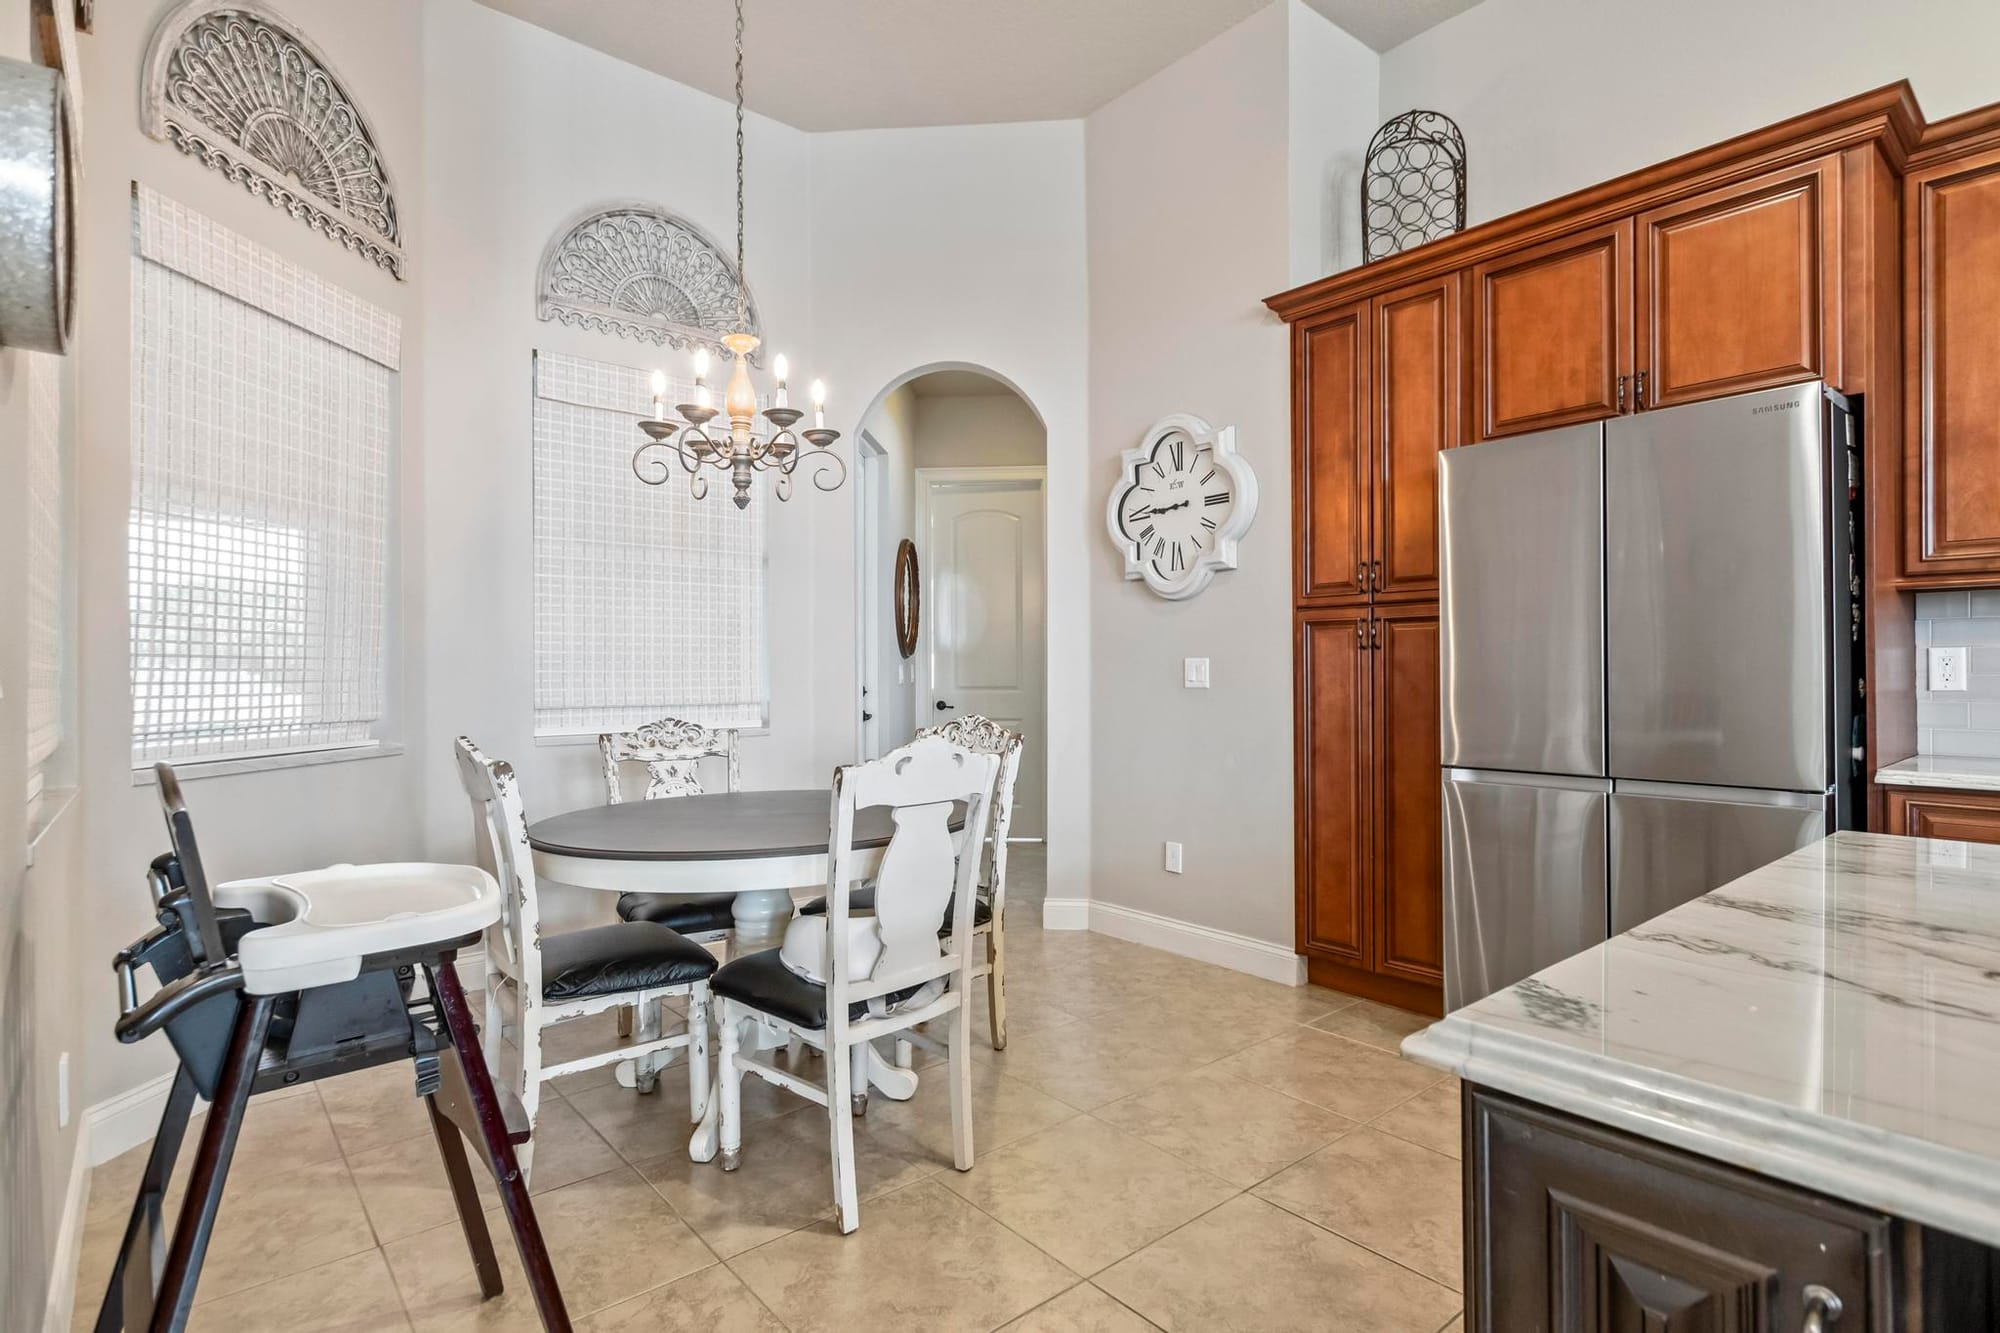 Virtual Open House Feature: Spacious Florida Living- Luxurious Family Home in Eagle Lakes Community